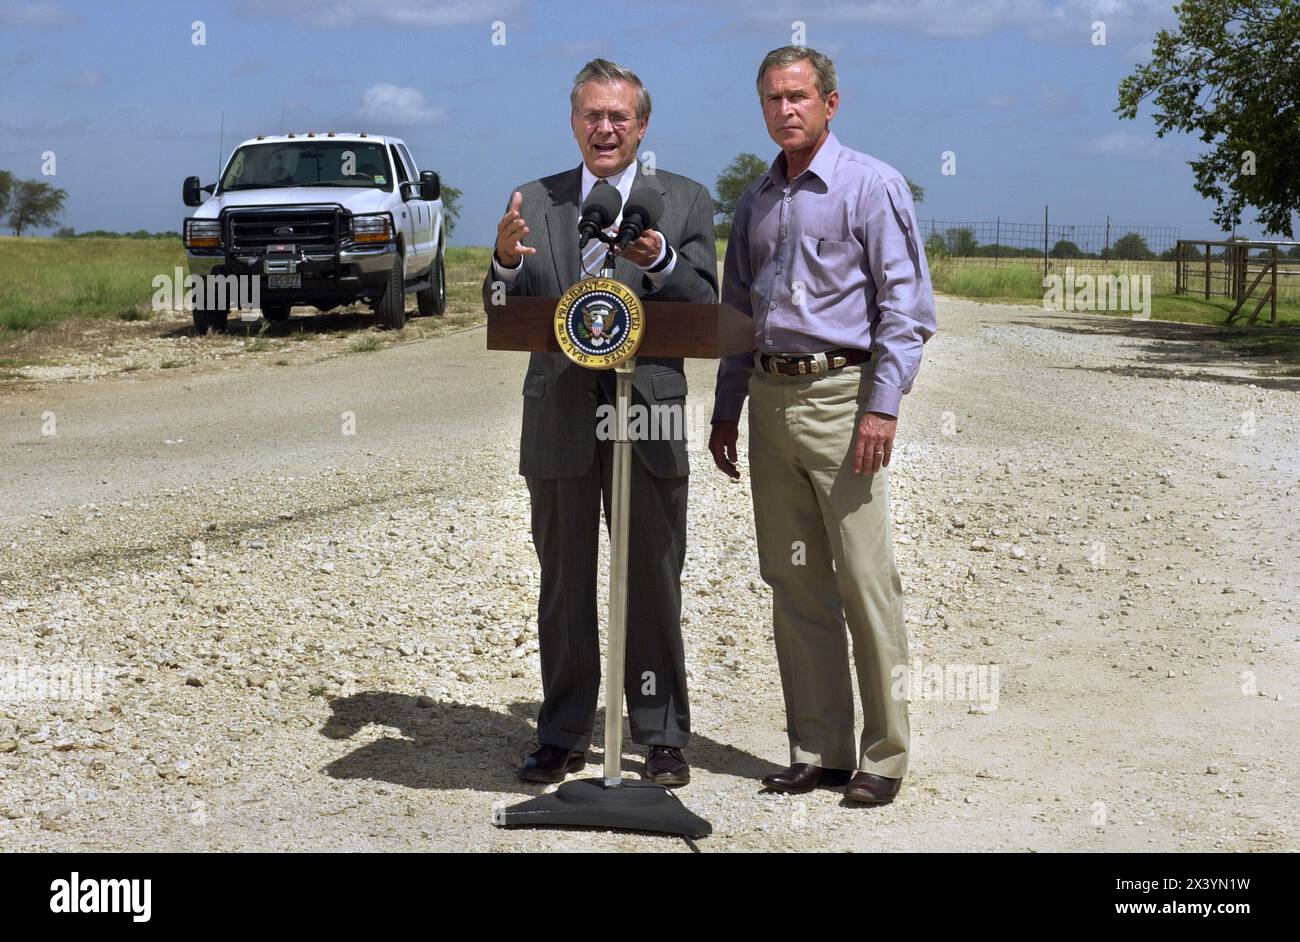 President George W. Bush and Secretary of Defense Donald Rumsfeld during a press conference at the President's ranch in Crawford, Texas, August 21, 2002.  Rumsfeld flew in from Was Stock Photo